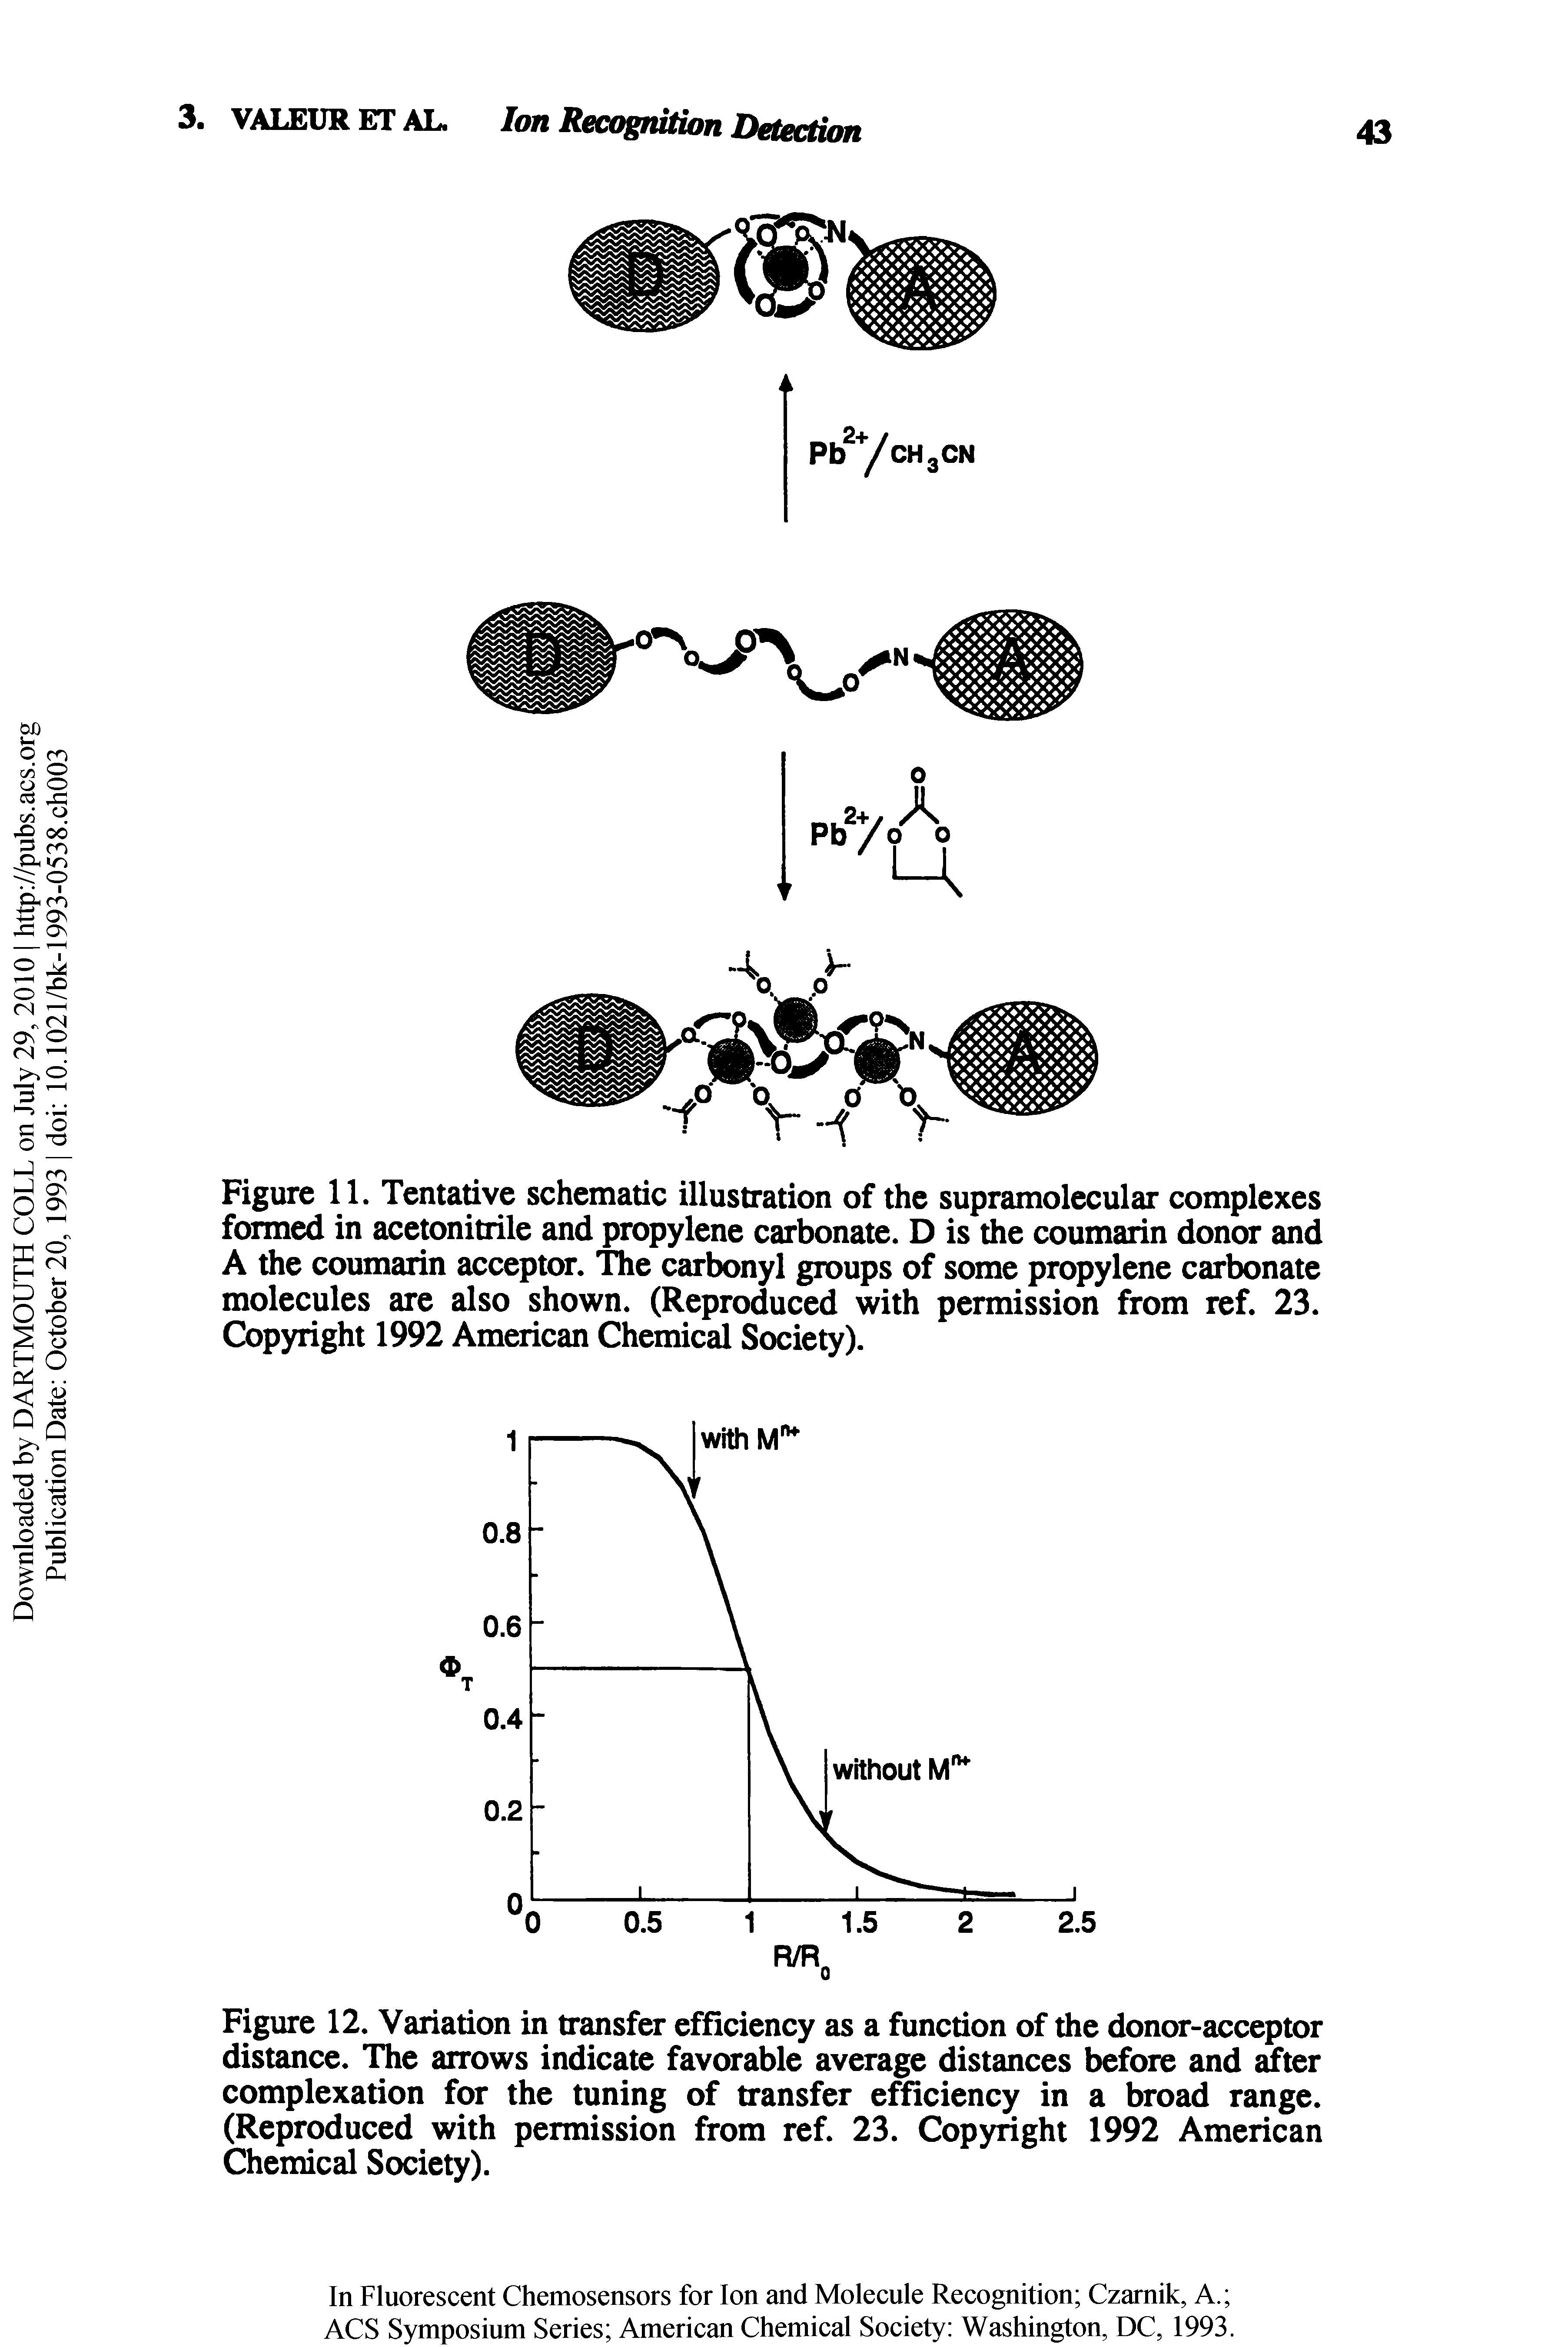 Figure 11. Tentative schematic illustration of the supramolecular complexes formed in acetonitrile and propylene carbonate. D is the coumarin donor and A the coumarin acceptor. The carbonyl groups of some propylene carbonate molecules are also shown. (Reproduced with permission from ref. 23. Copyright 1992 American Chemical Society).